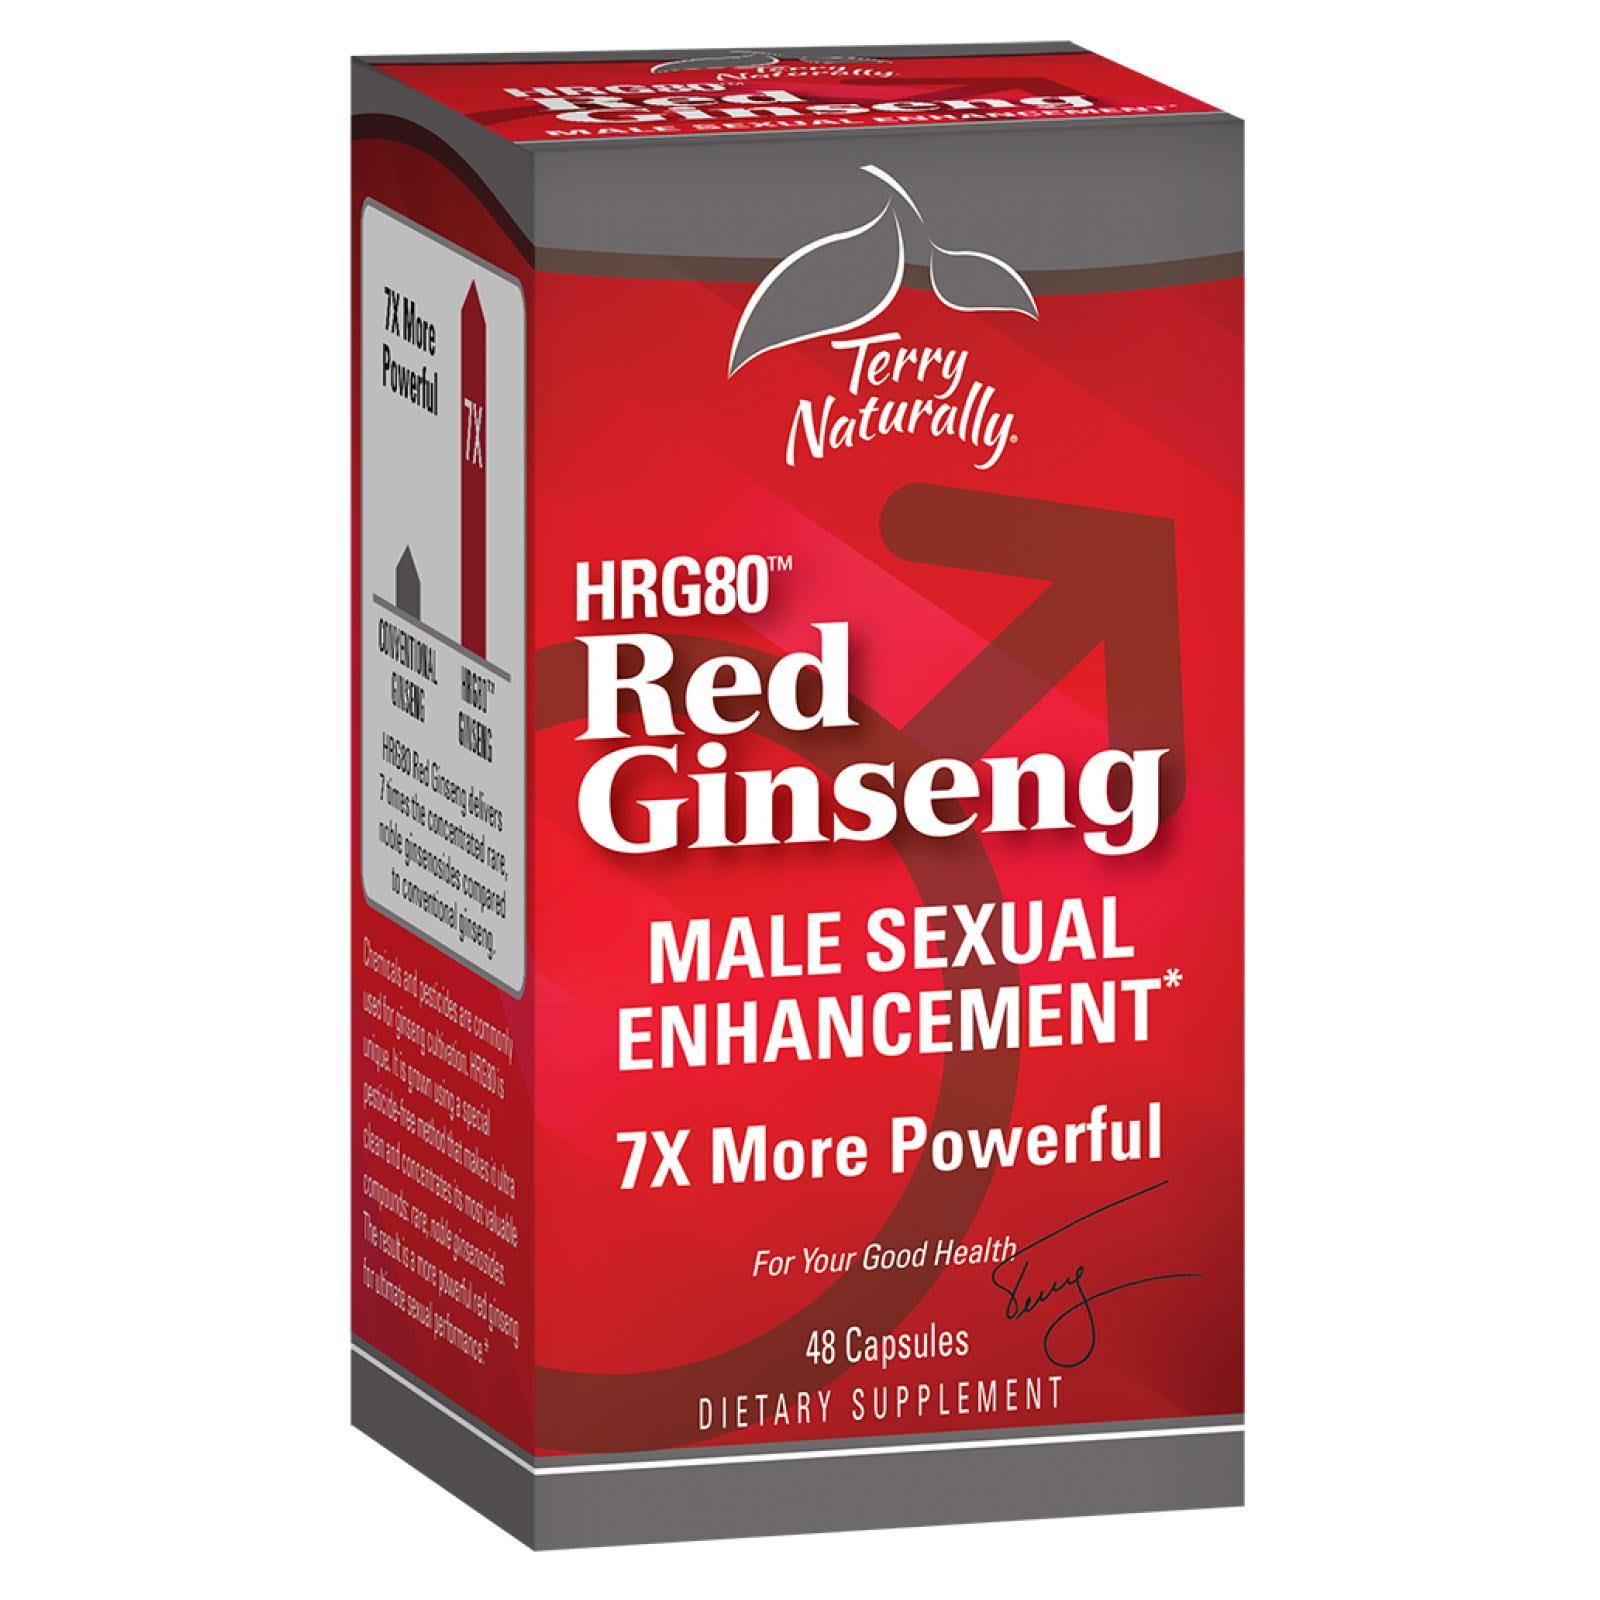 Terry Naturally Red Ginseng 7X More Powerful-48 Capsules